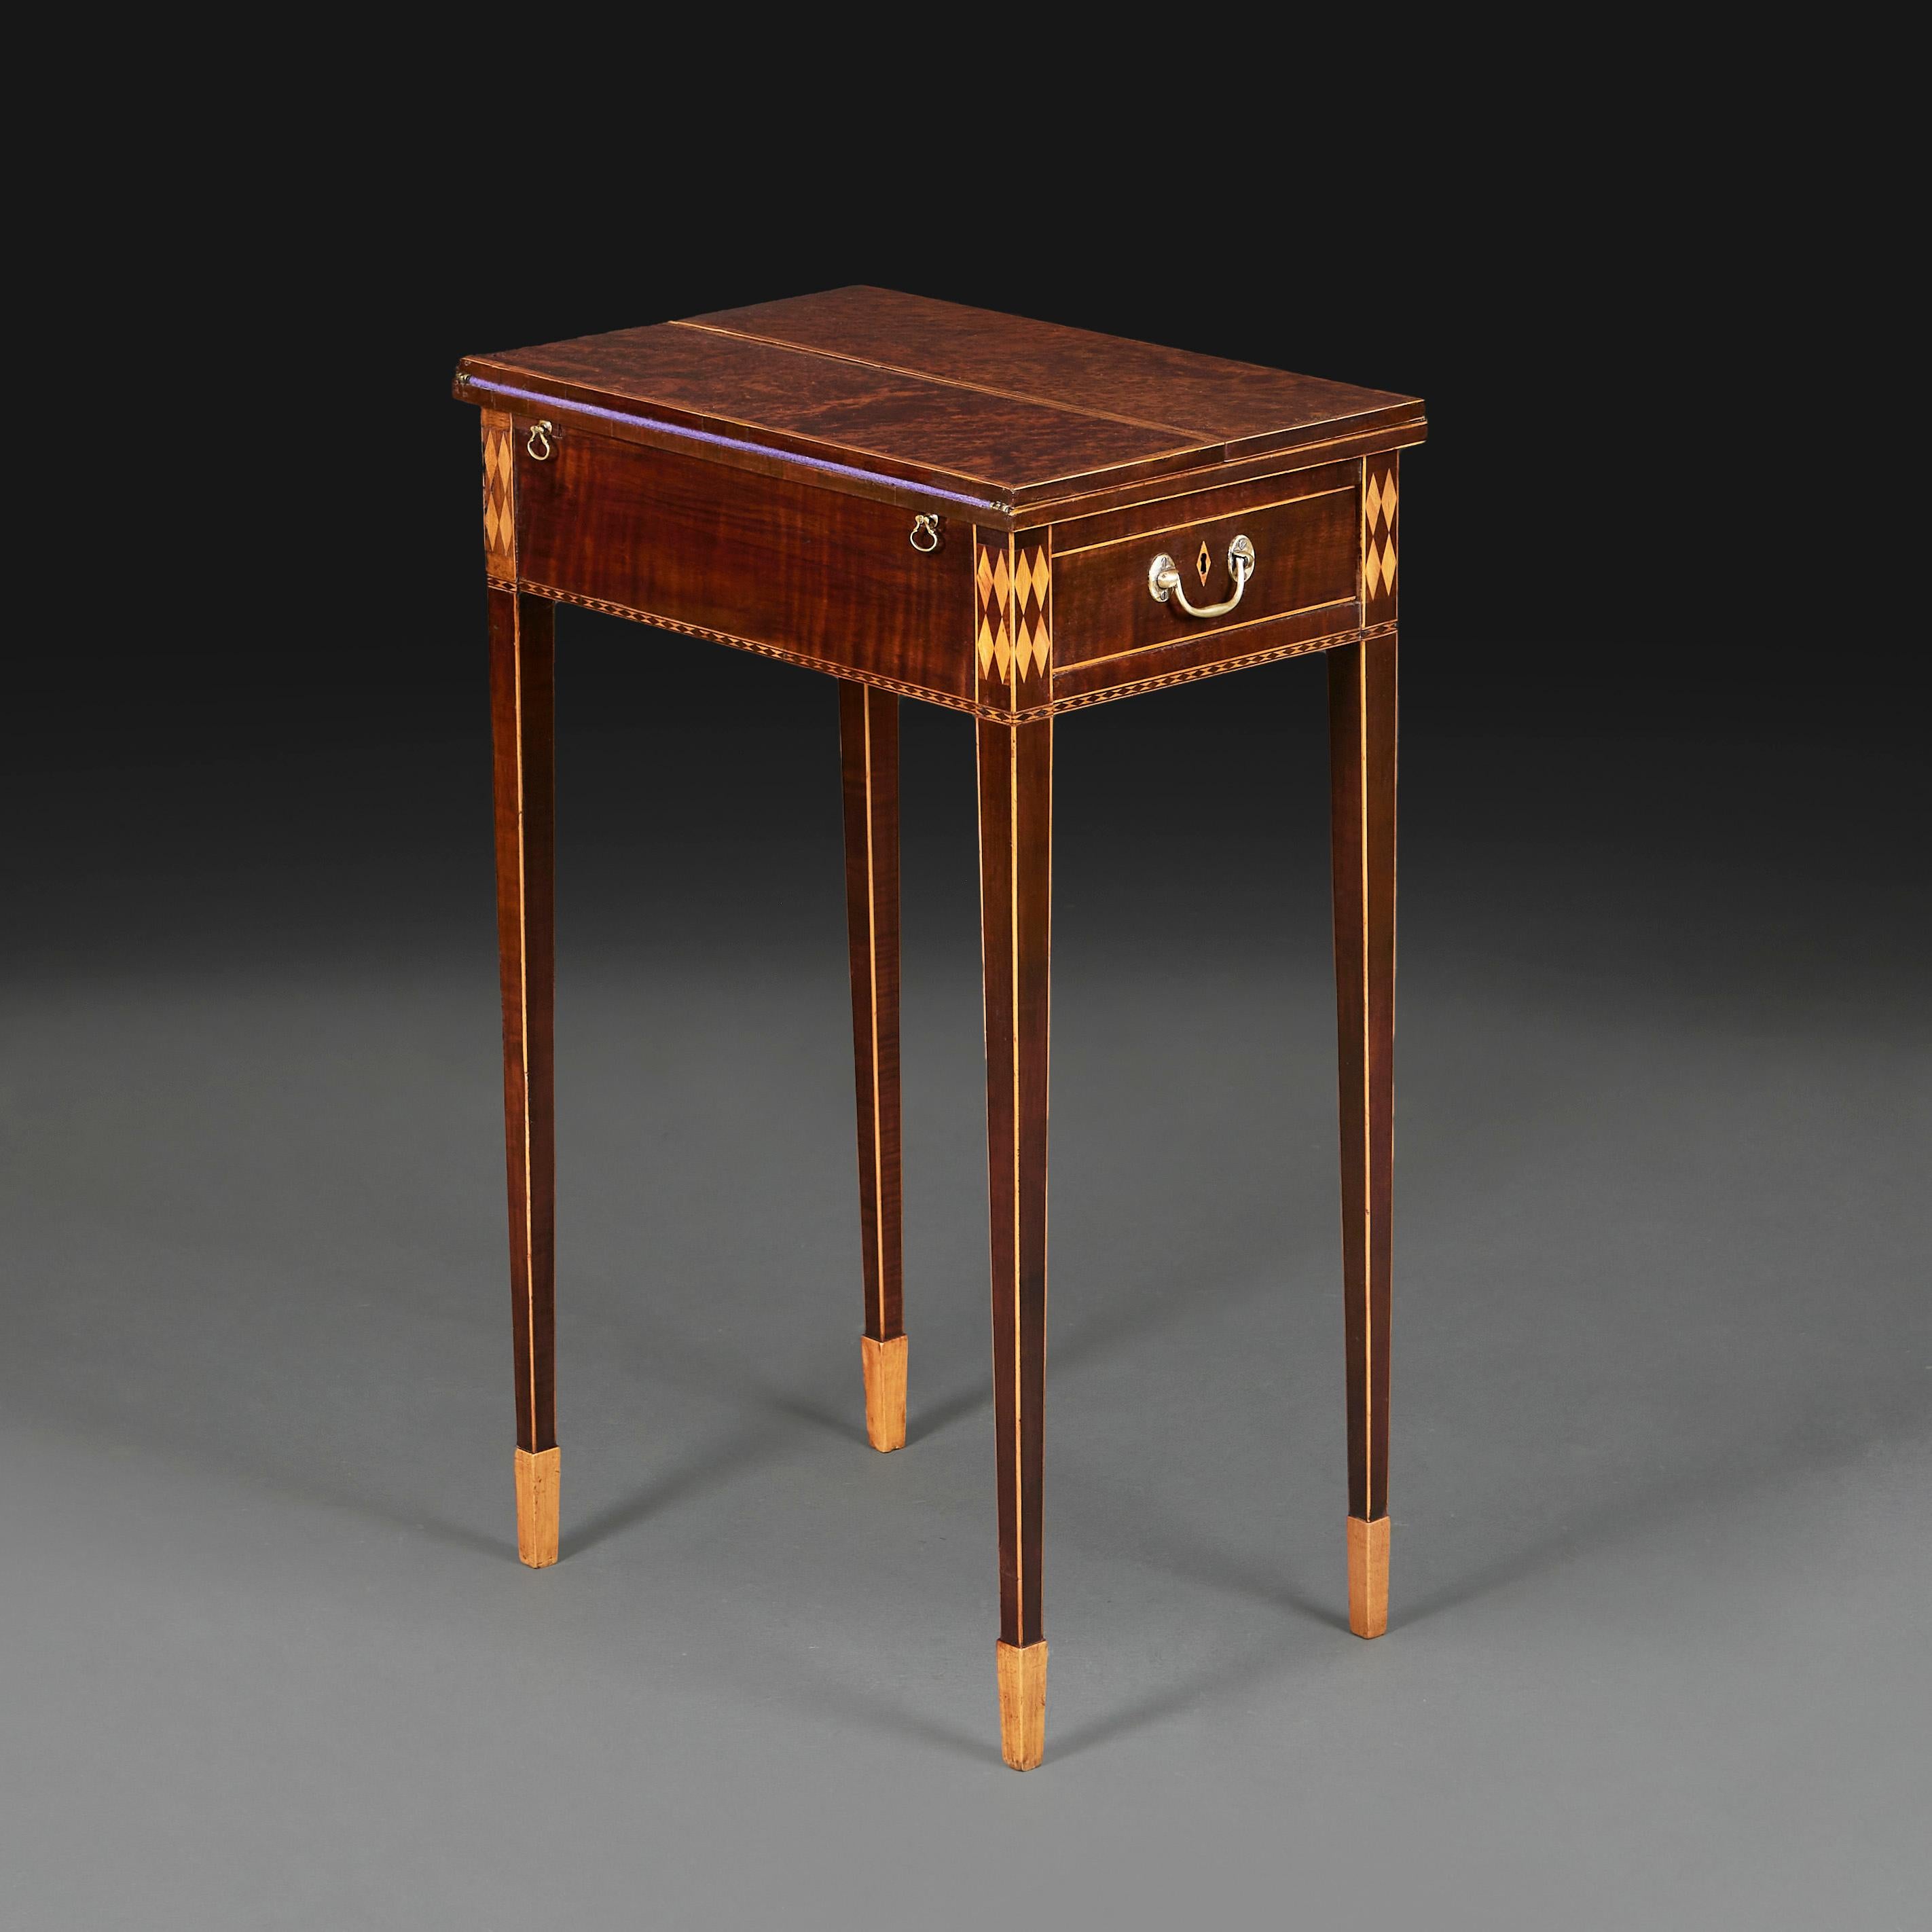 England, circa 1790

A very fine rectangular late eighteenth century writing table, the top veneered with burr mulberry, with four lopers to support the open top, single drawer to the frieze, harlequin marquetry decoration throughout, supported on